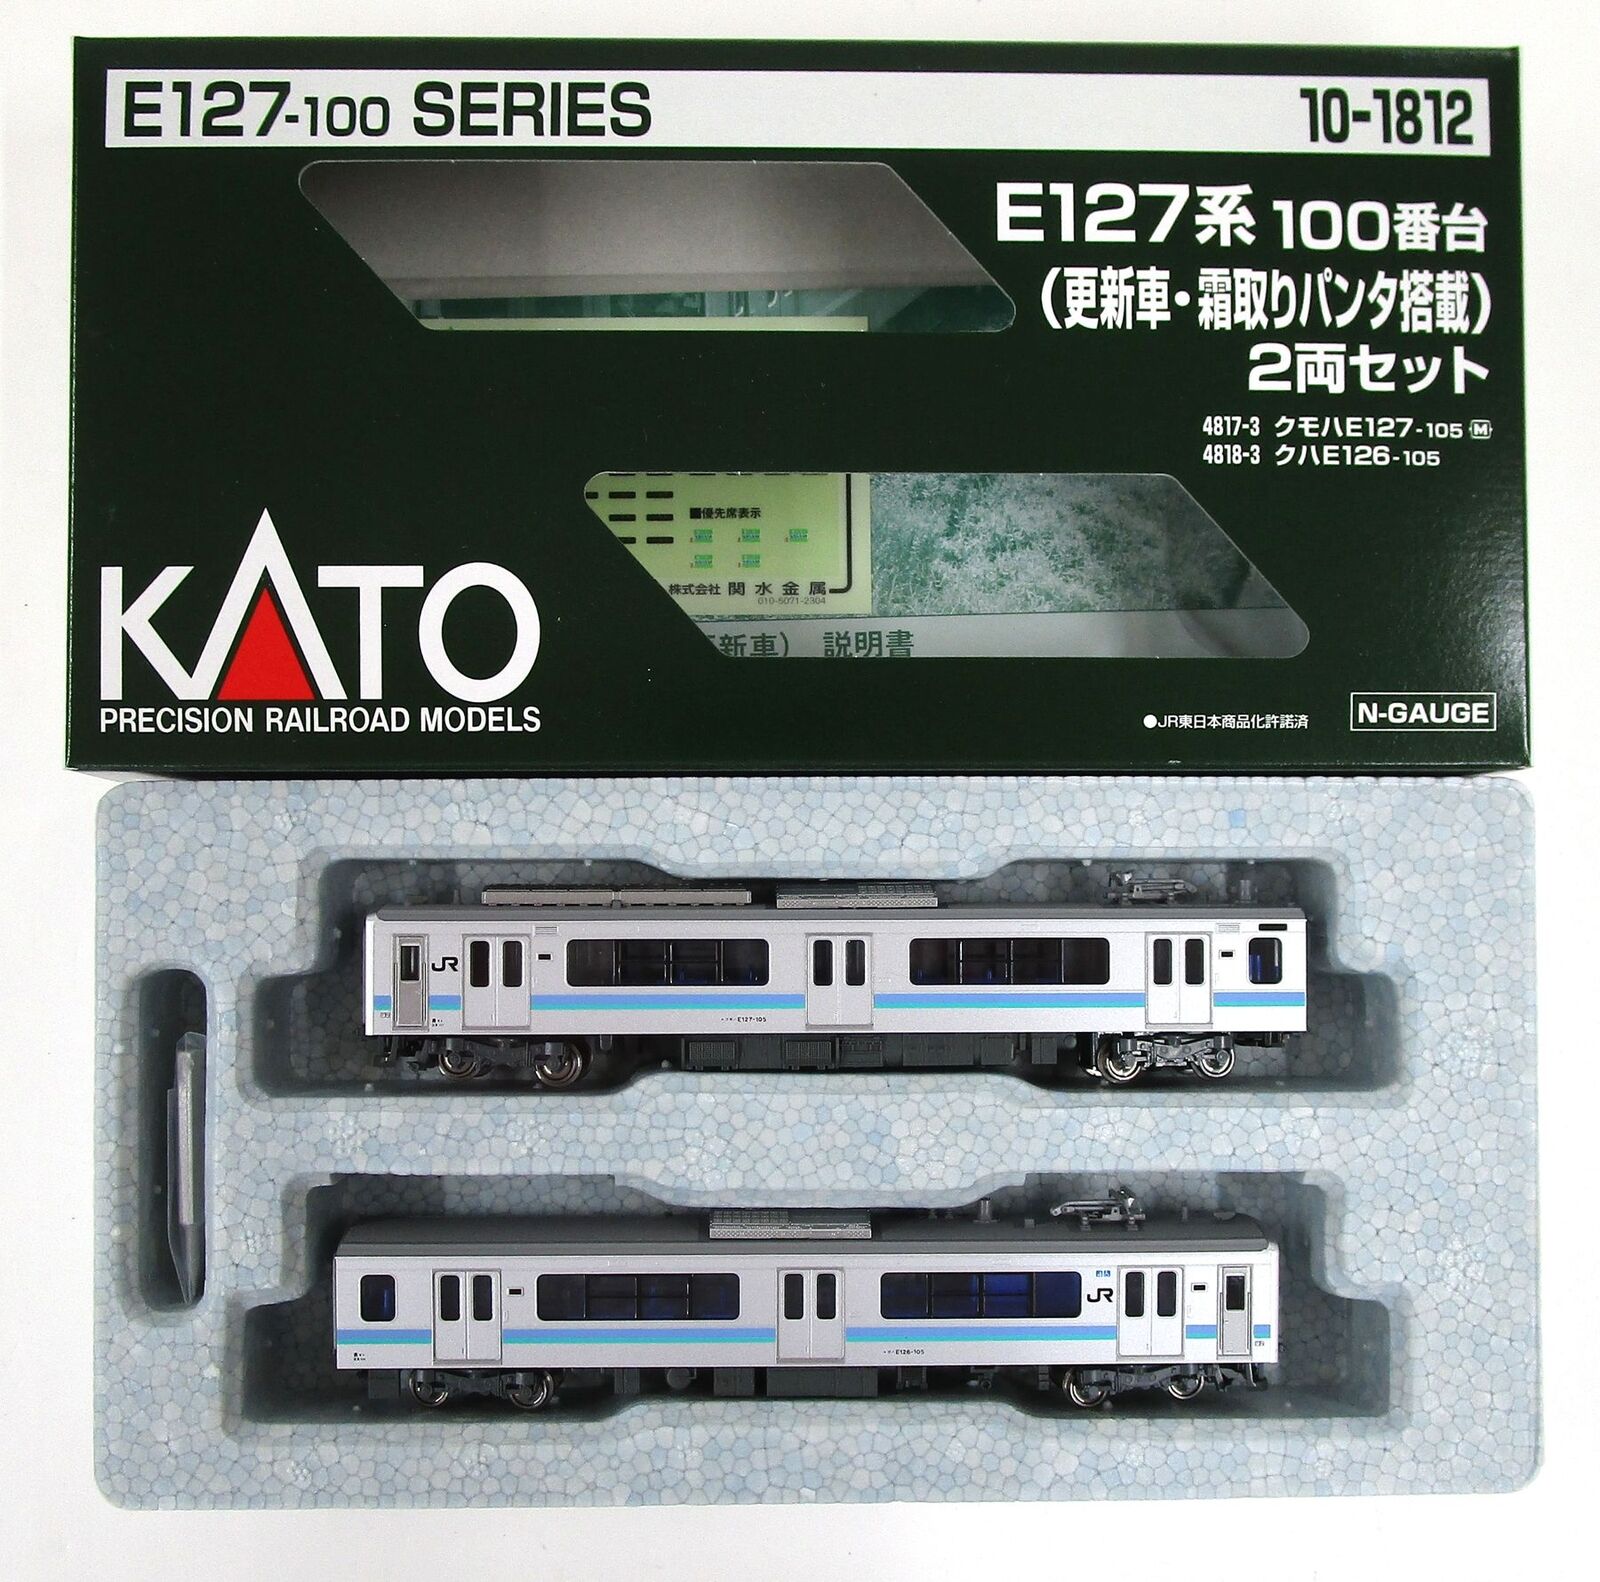 N Gauge Kato 10-1812 E127 Series 100 Updated Car Equipped With Defrost Pantograp